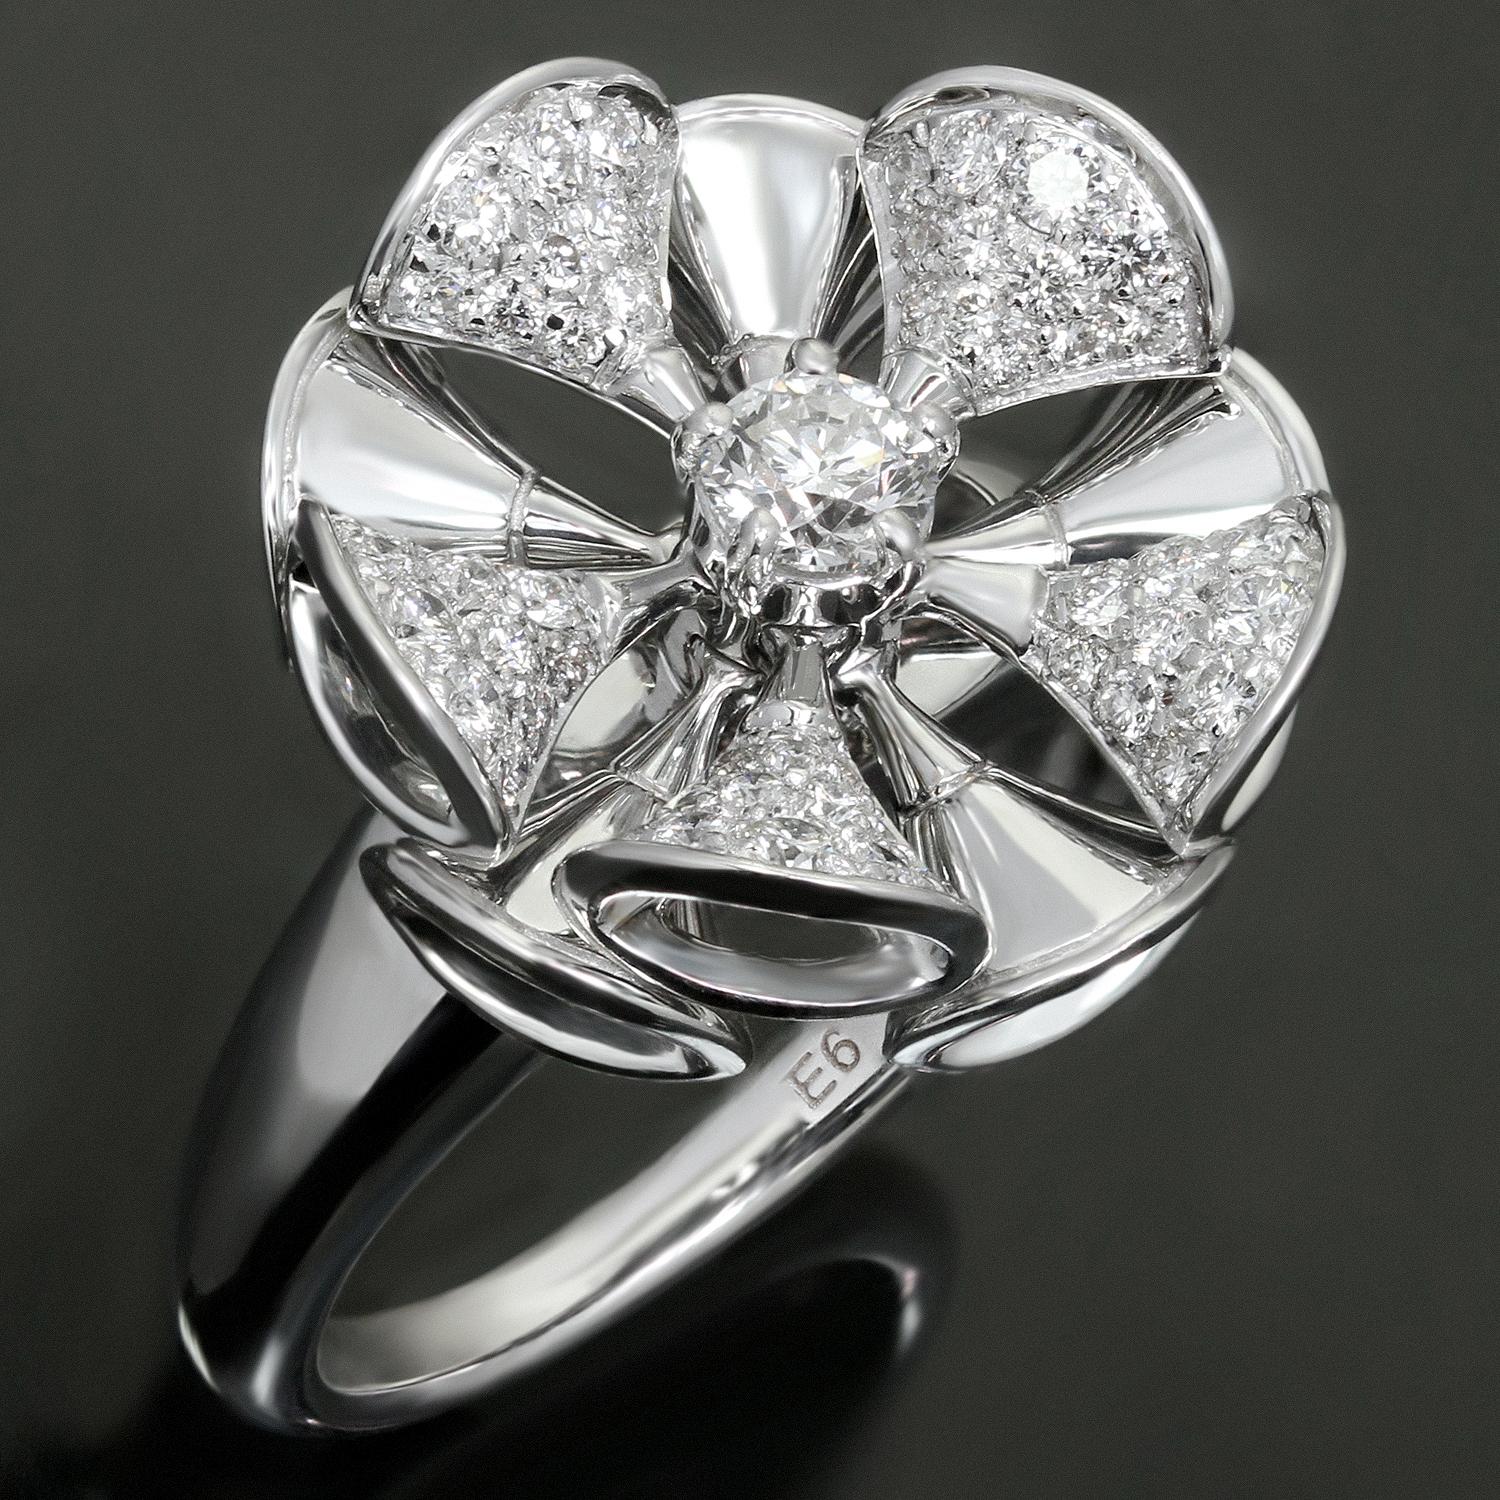 This exquisite Bvlgari ring from the sophisticated Divas' collection features a floral design crafted in 18k white gold and set with brilliant-cut round D-F VVS2-VS1 diamonds. Made in Italy circa 2010s. The Divas' Dream collection is inspired by